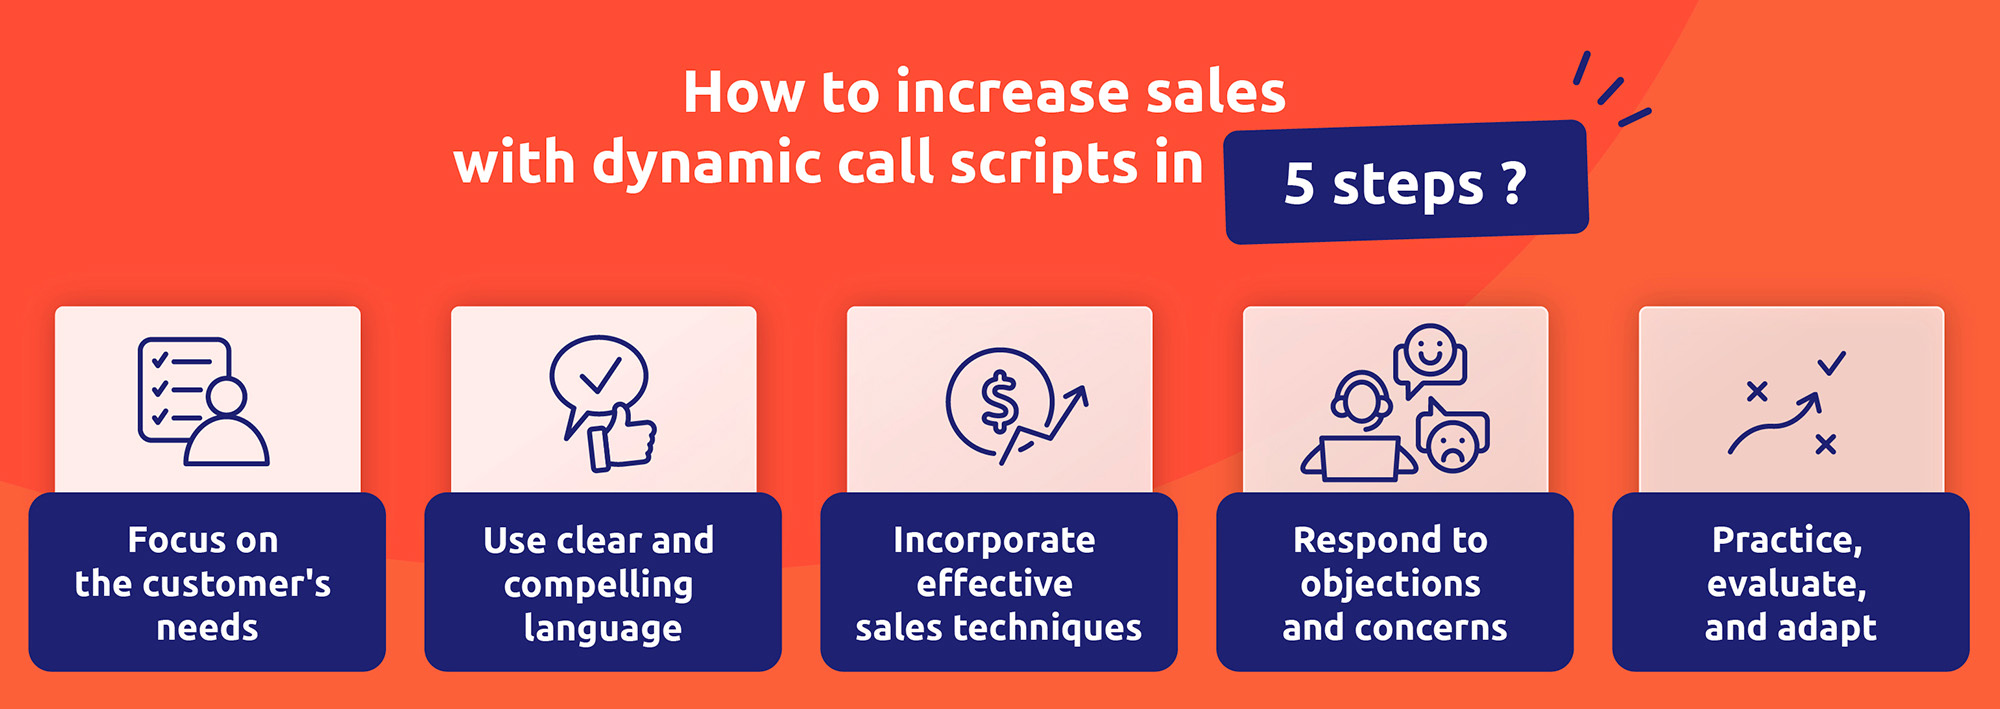 A strategy on how to increase sales with dynamic call scripts in 5 steps